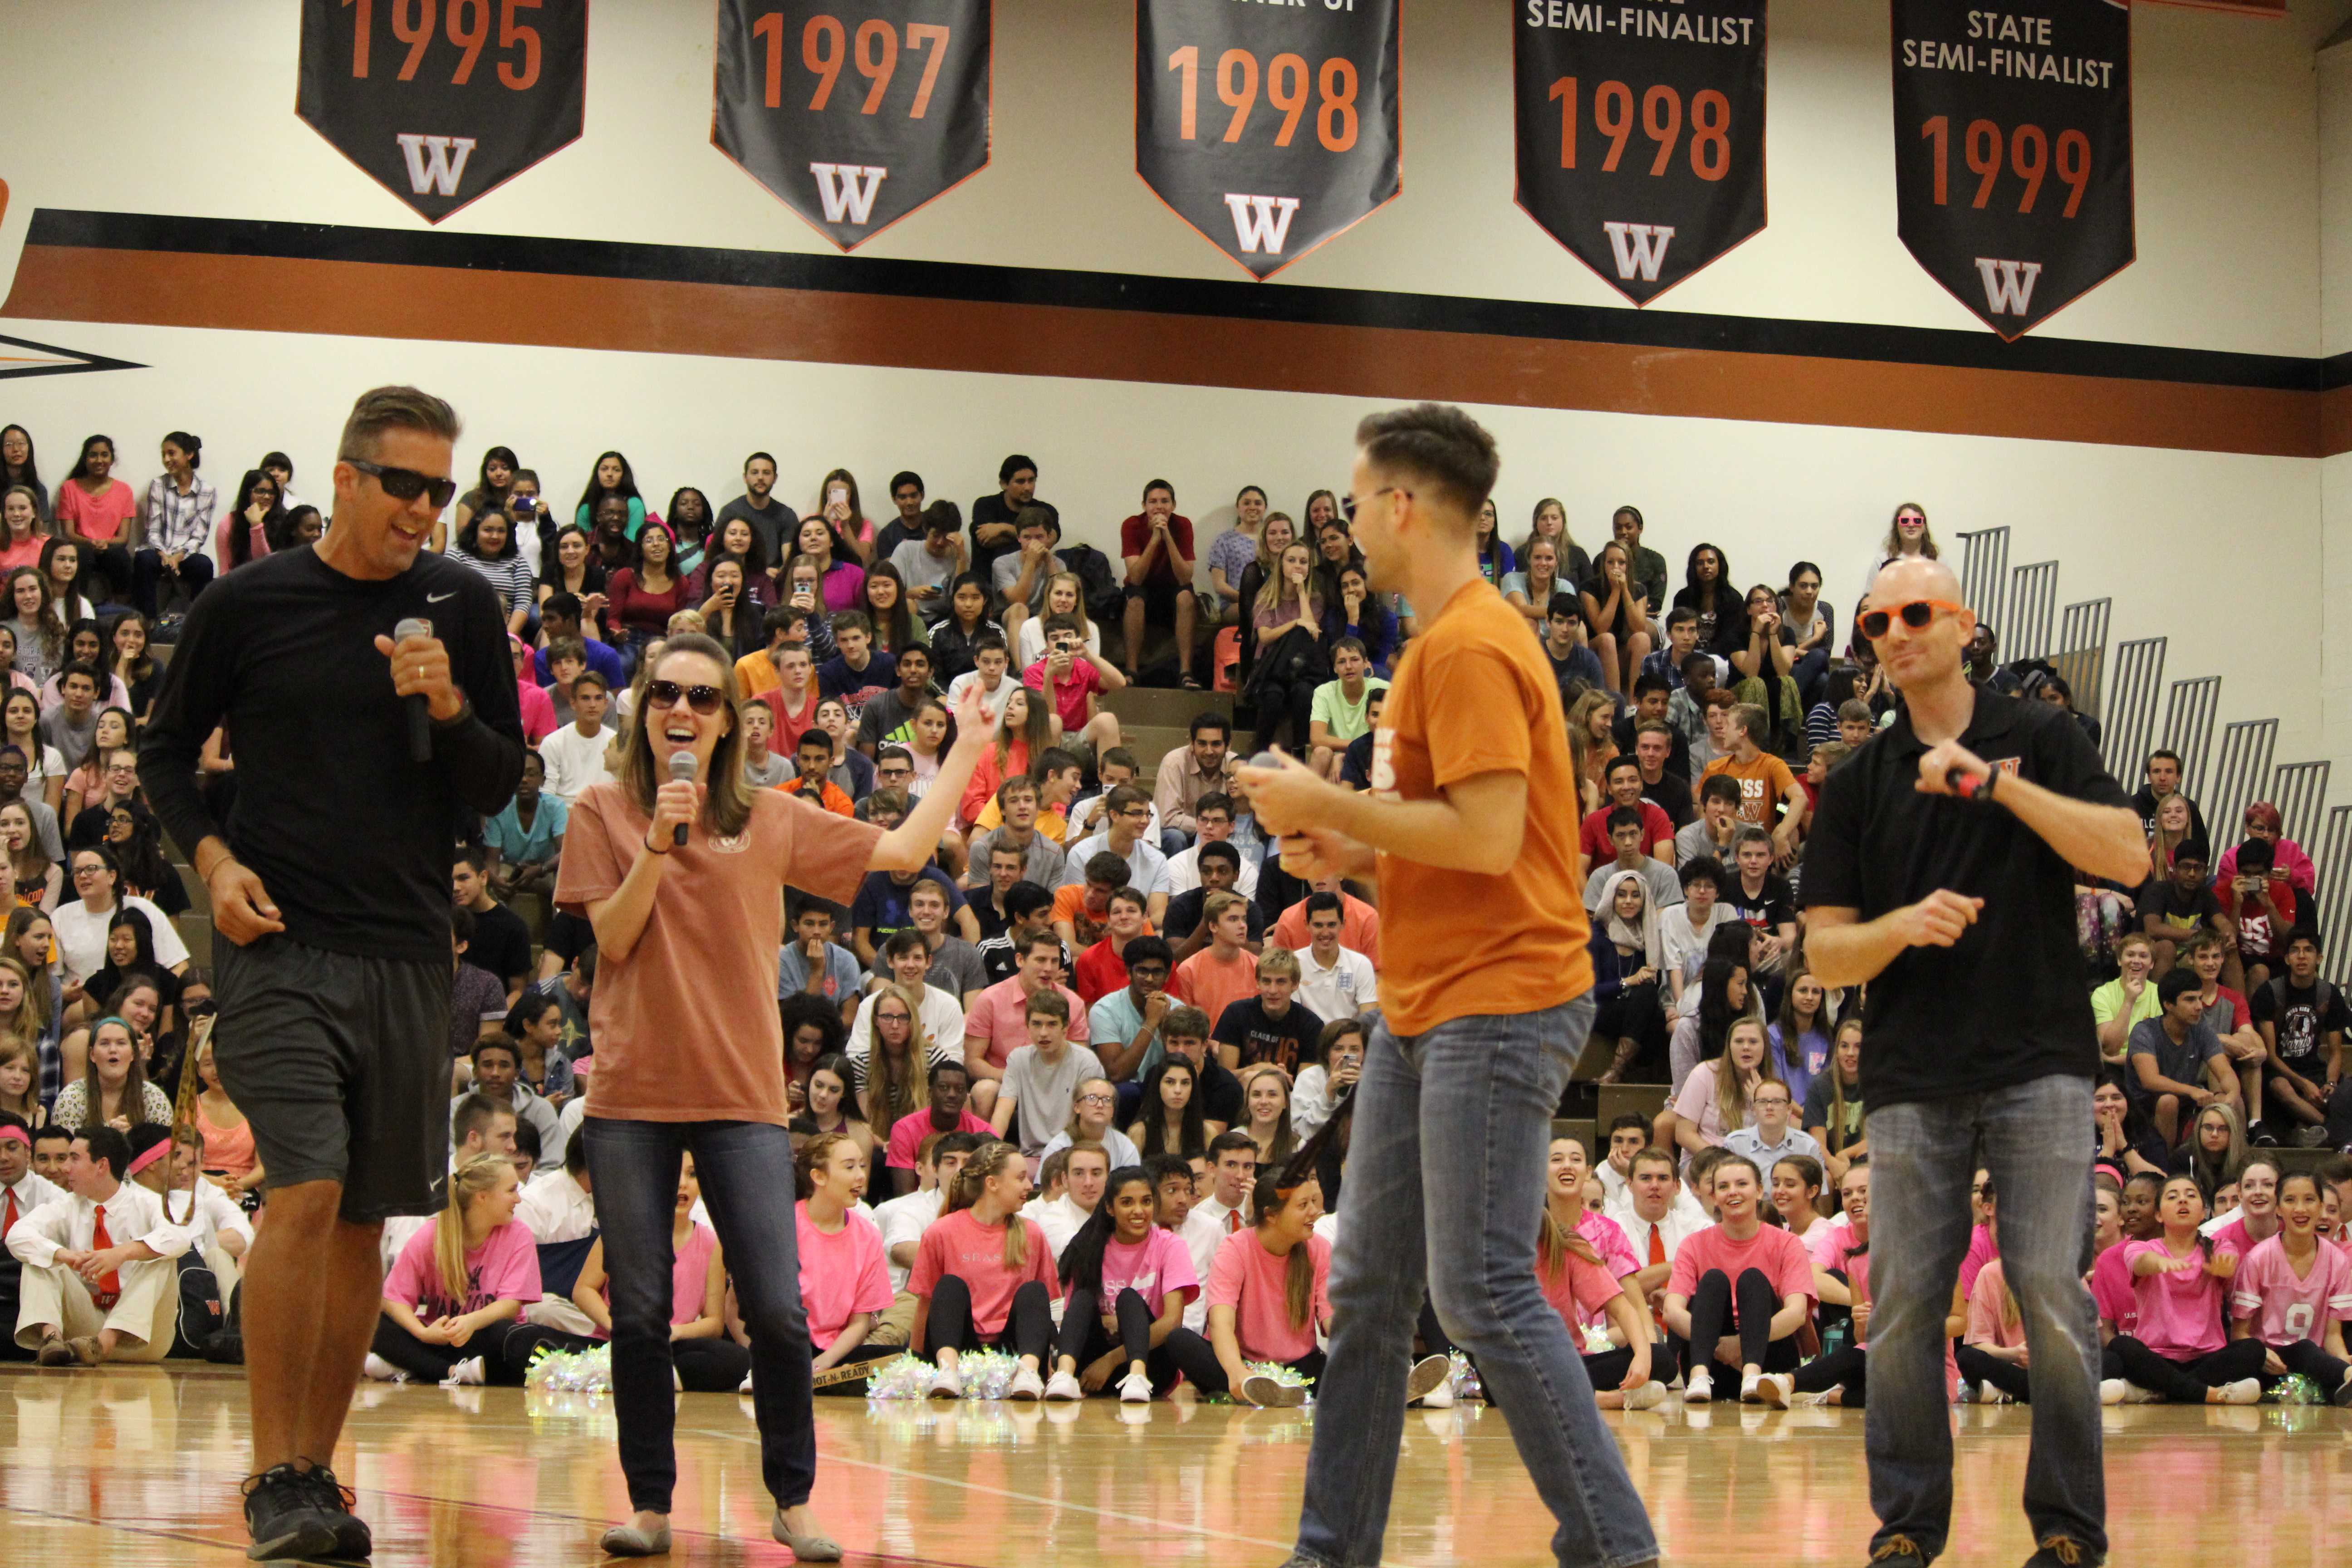 Students+Raise+Awareness+of+Breast+Cancer+During+Pep+Rally